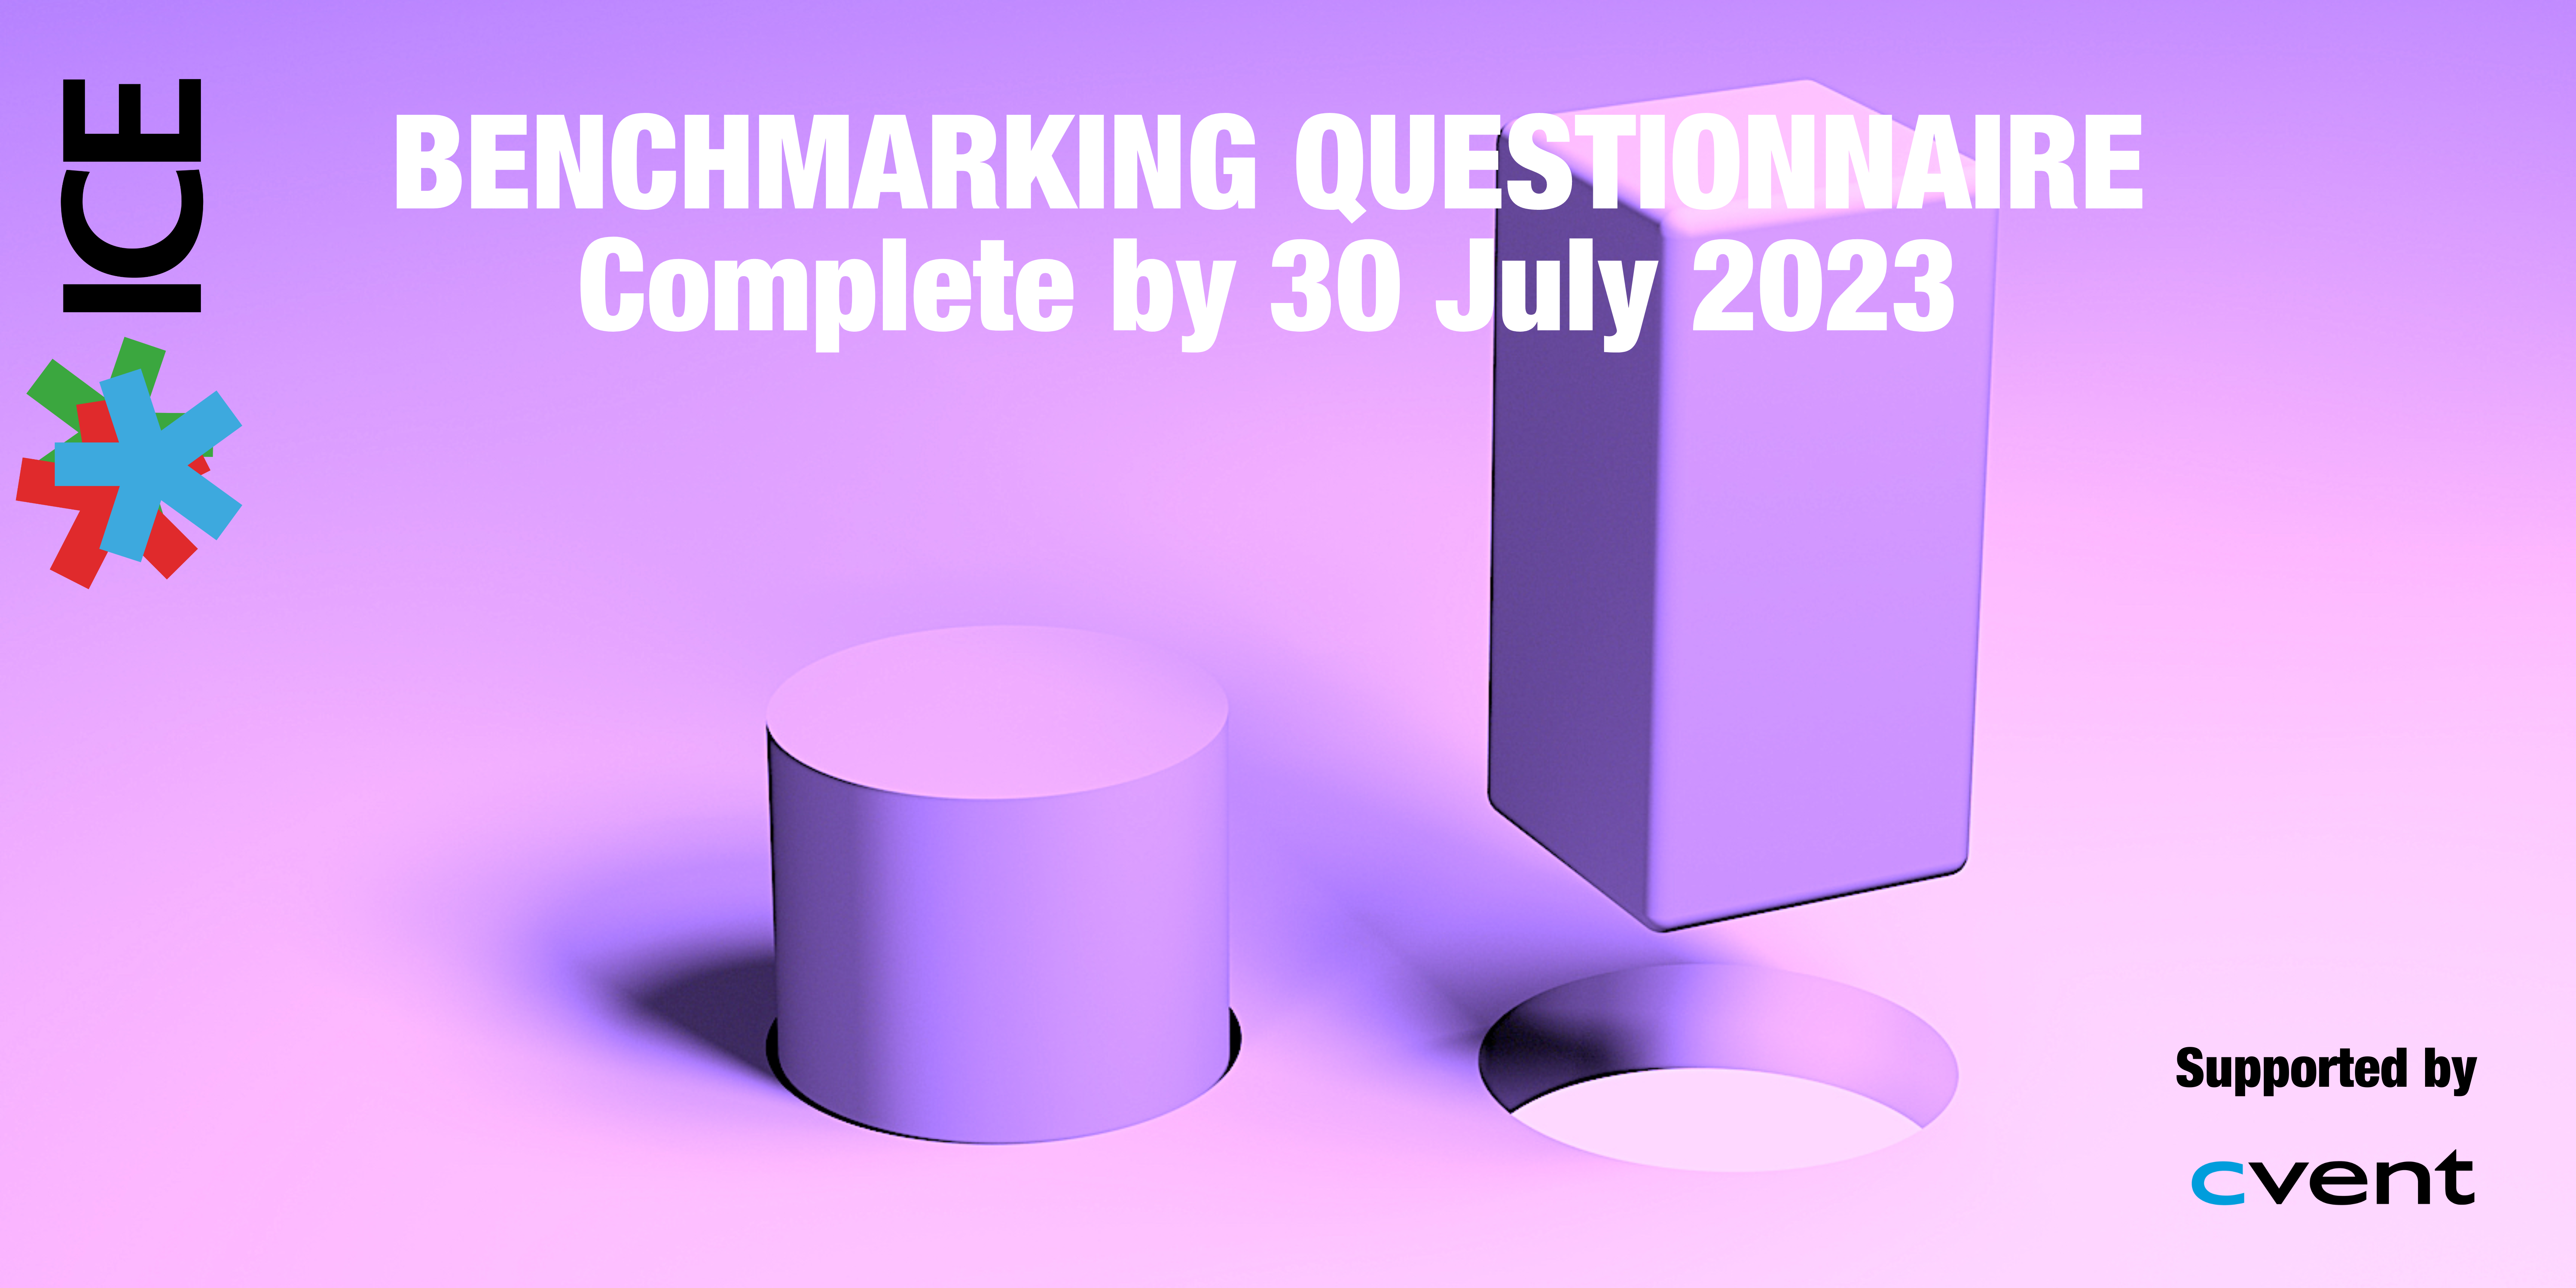 Research 2023 Banner Questionnaire complete